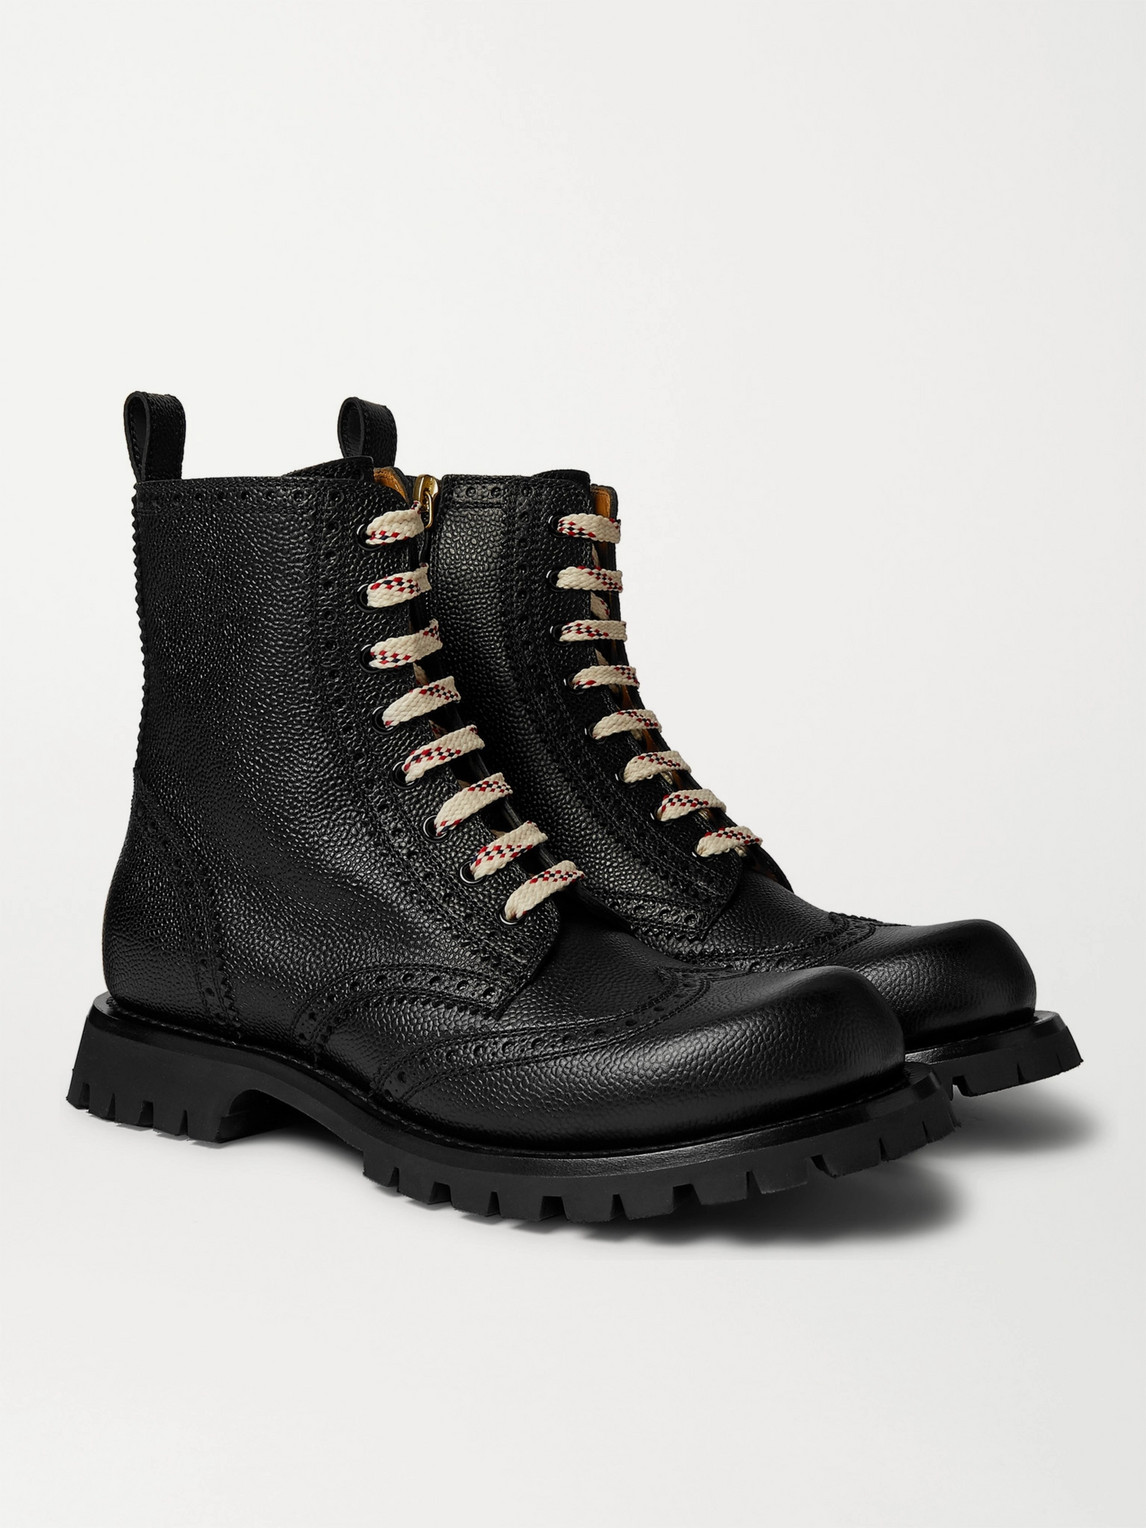 GUCCI NEW ARLEY PEBBLE-GRAIN LEATHER BROGUE BOOTS